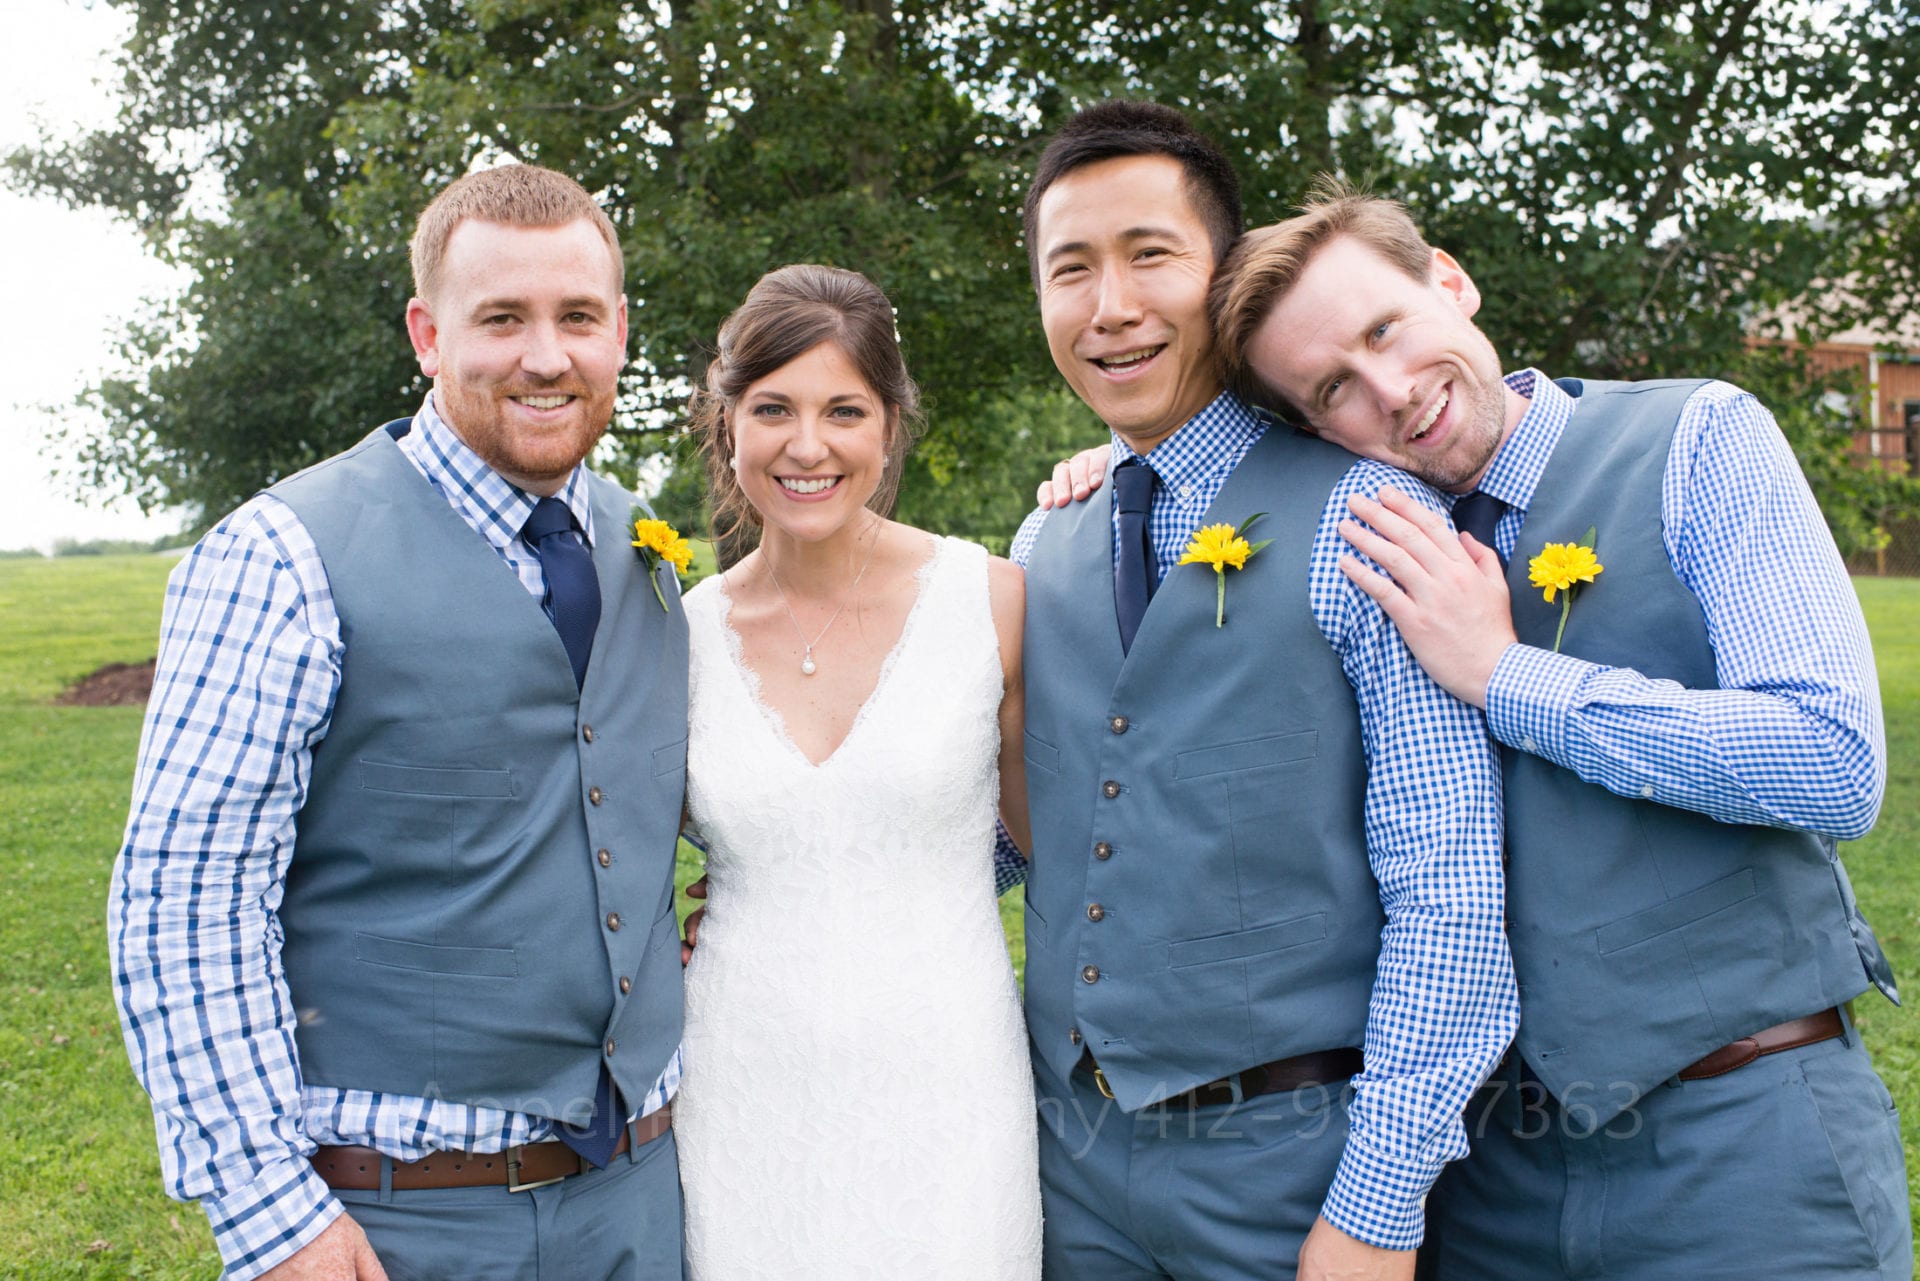 A bride at an Armstrong Farms Wedding smiles as she stands with three groomsmen wearing blue vests and checkered shirts. One groomsman rests his head on the shoulder of another groomsman.